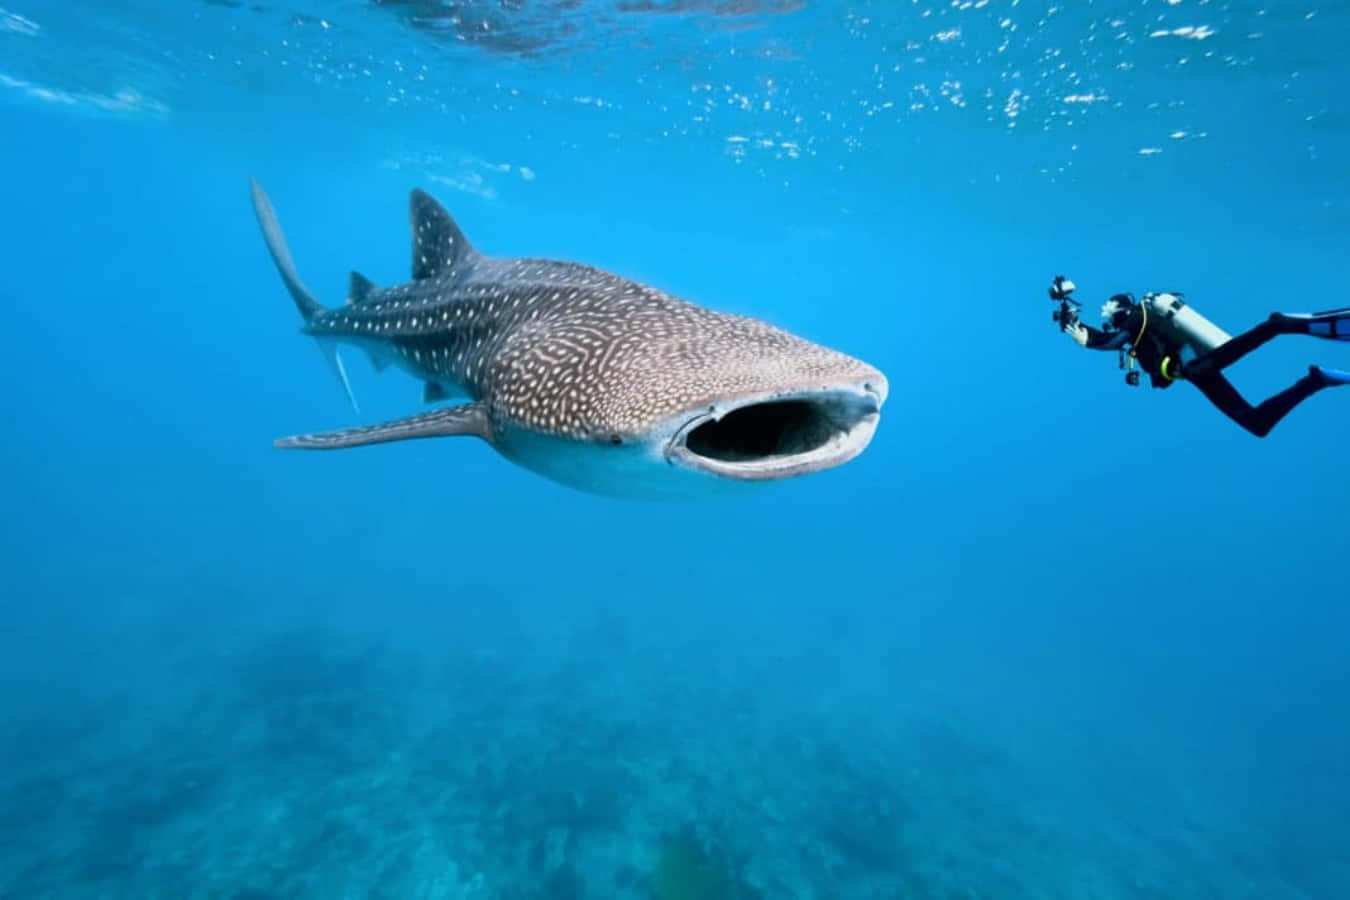 A majestic Whale Shark glides gracefully through the blue ocean.